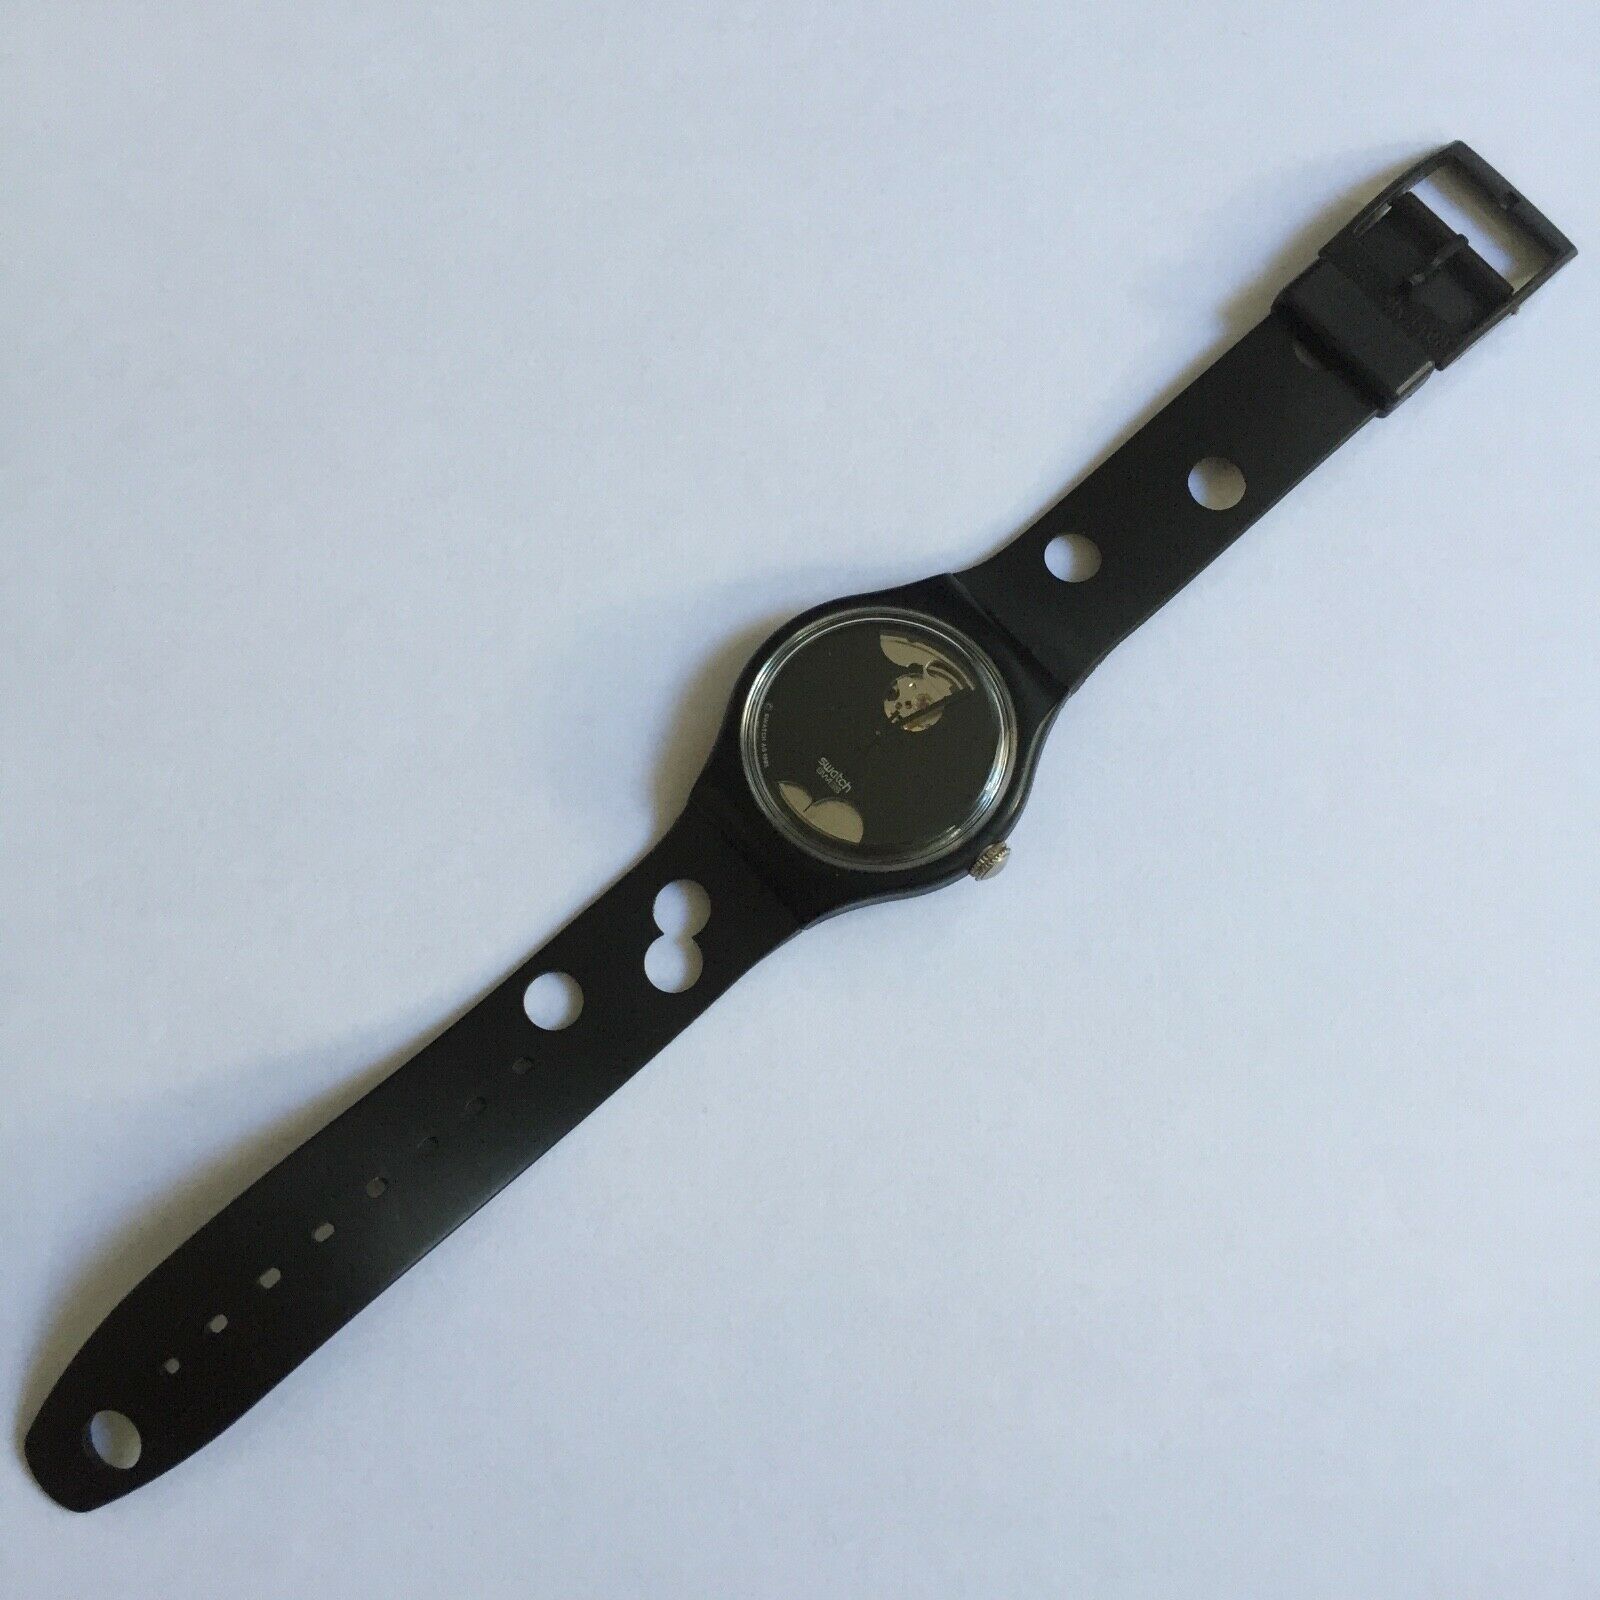 Swatch 23 jewels, Automatic Hole Punch Rare Design Vintage Watch